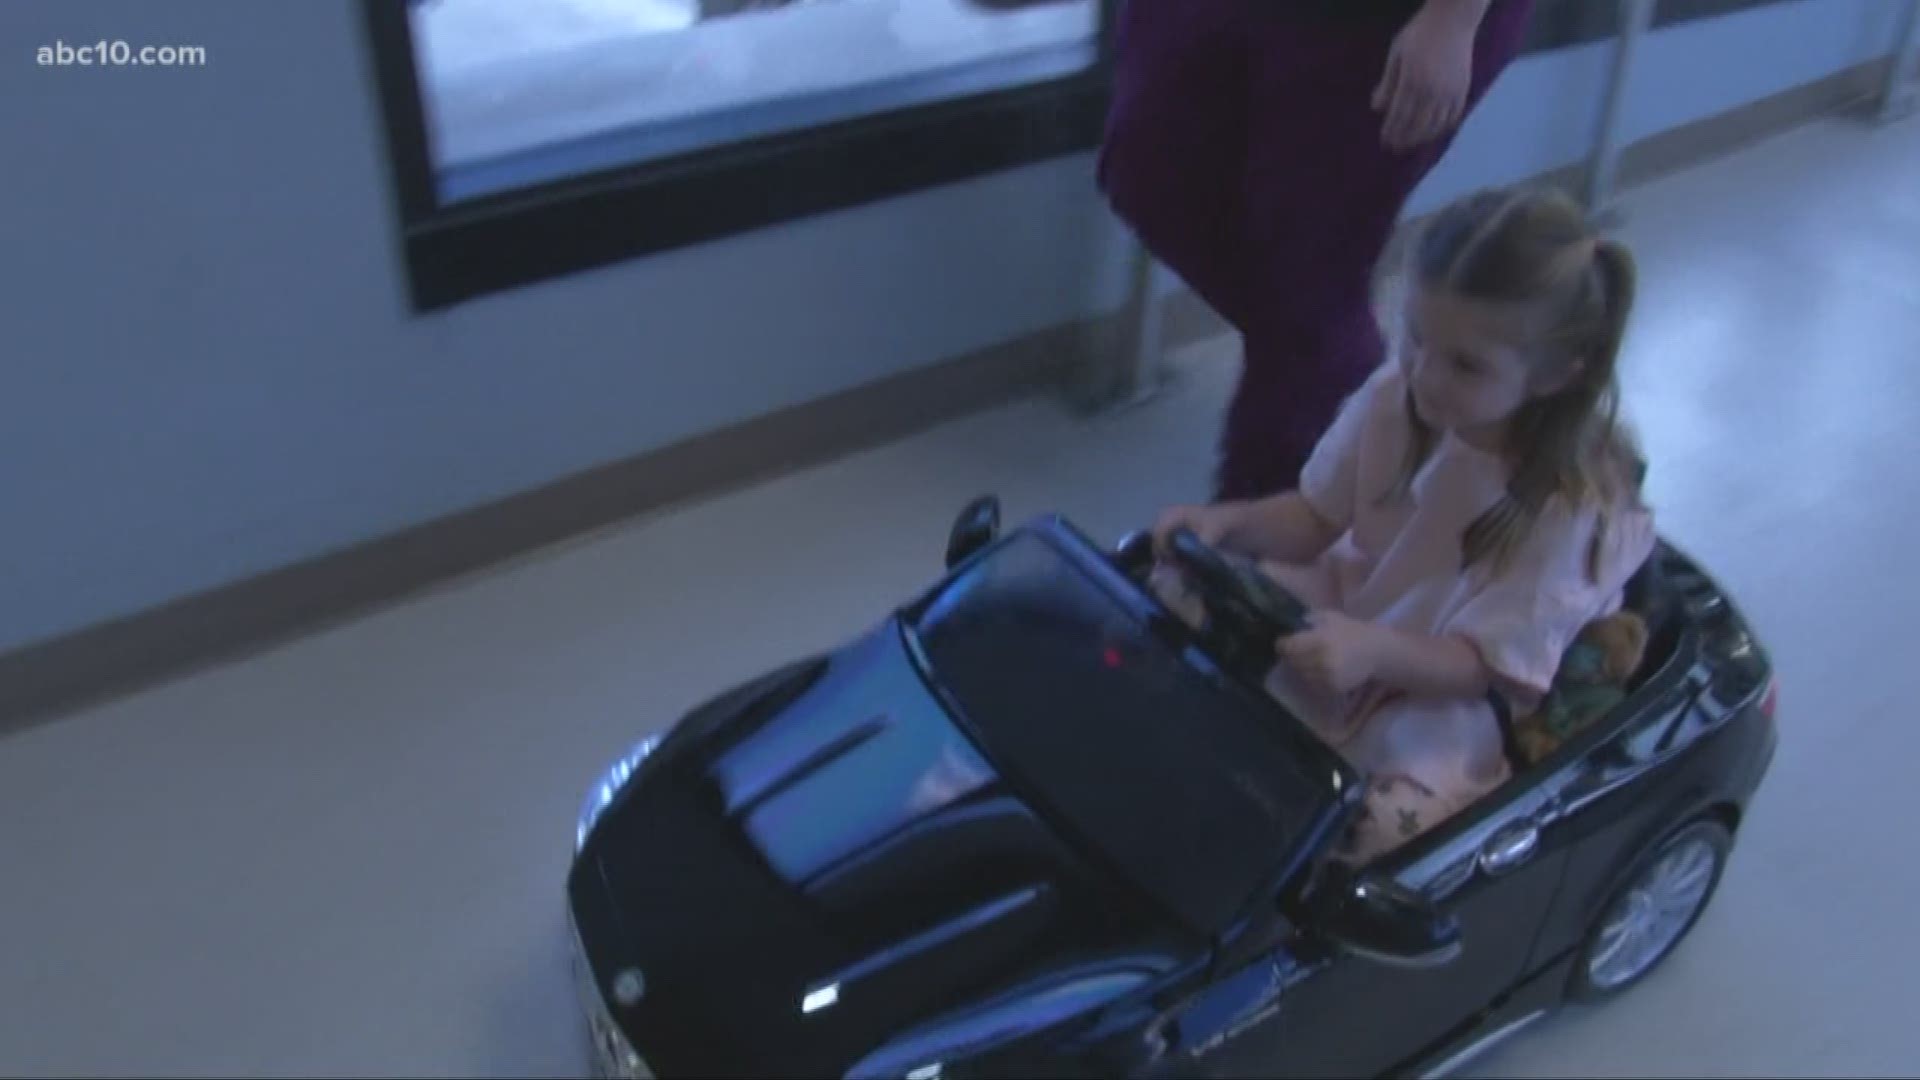 The Doctors Medical Center of Modesto has introduced a "Mercedes" into their operating room for some of their tiniest patients.